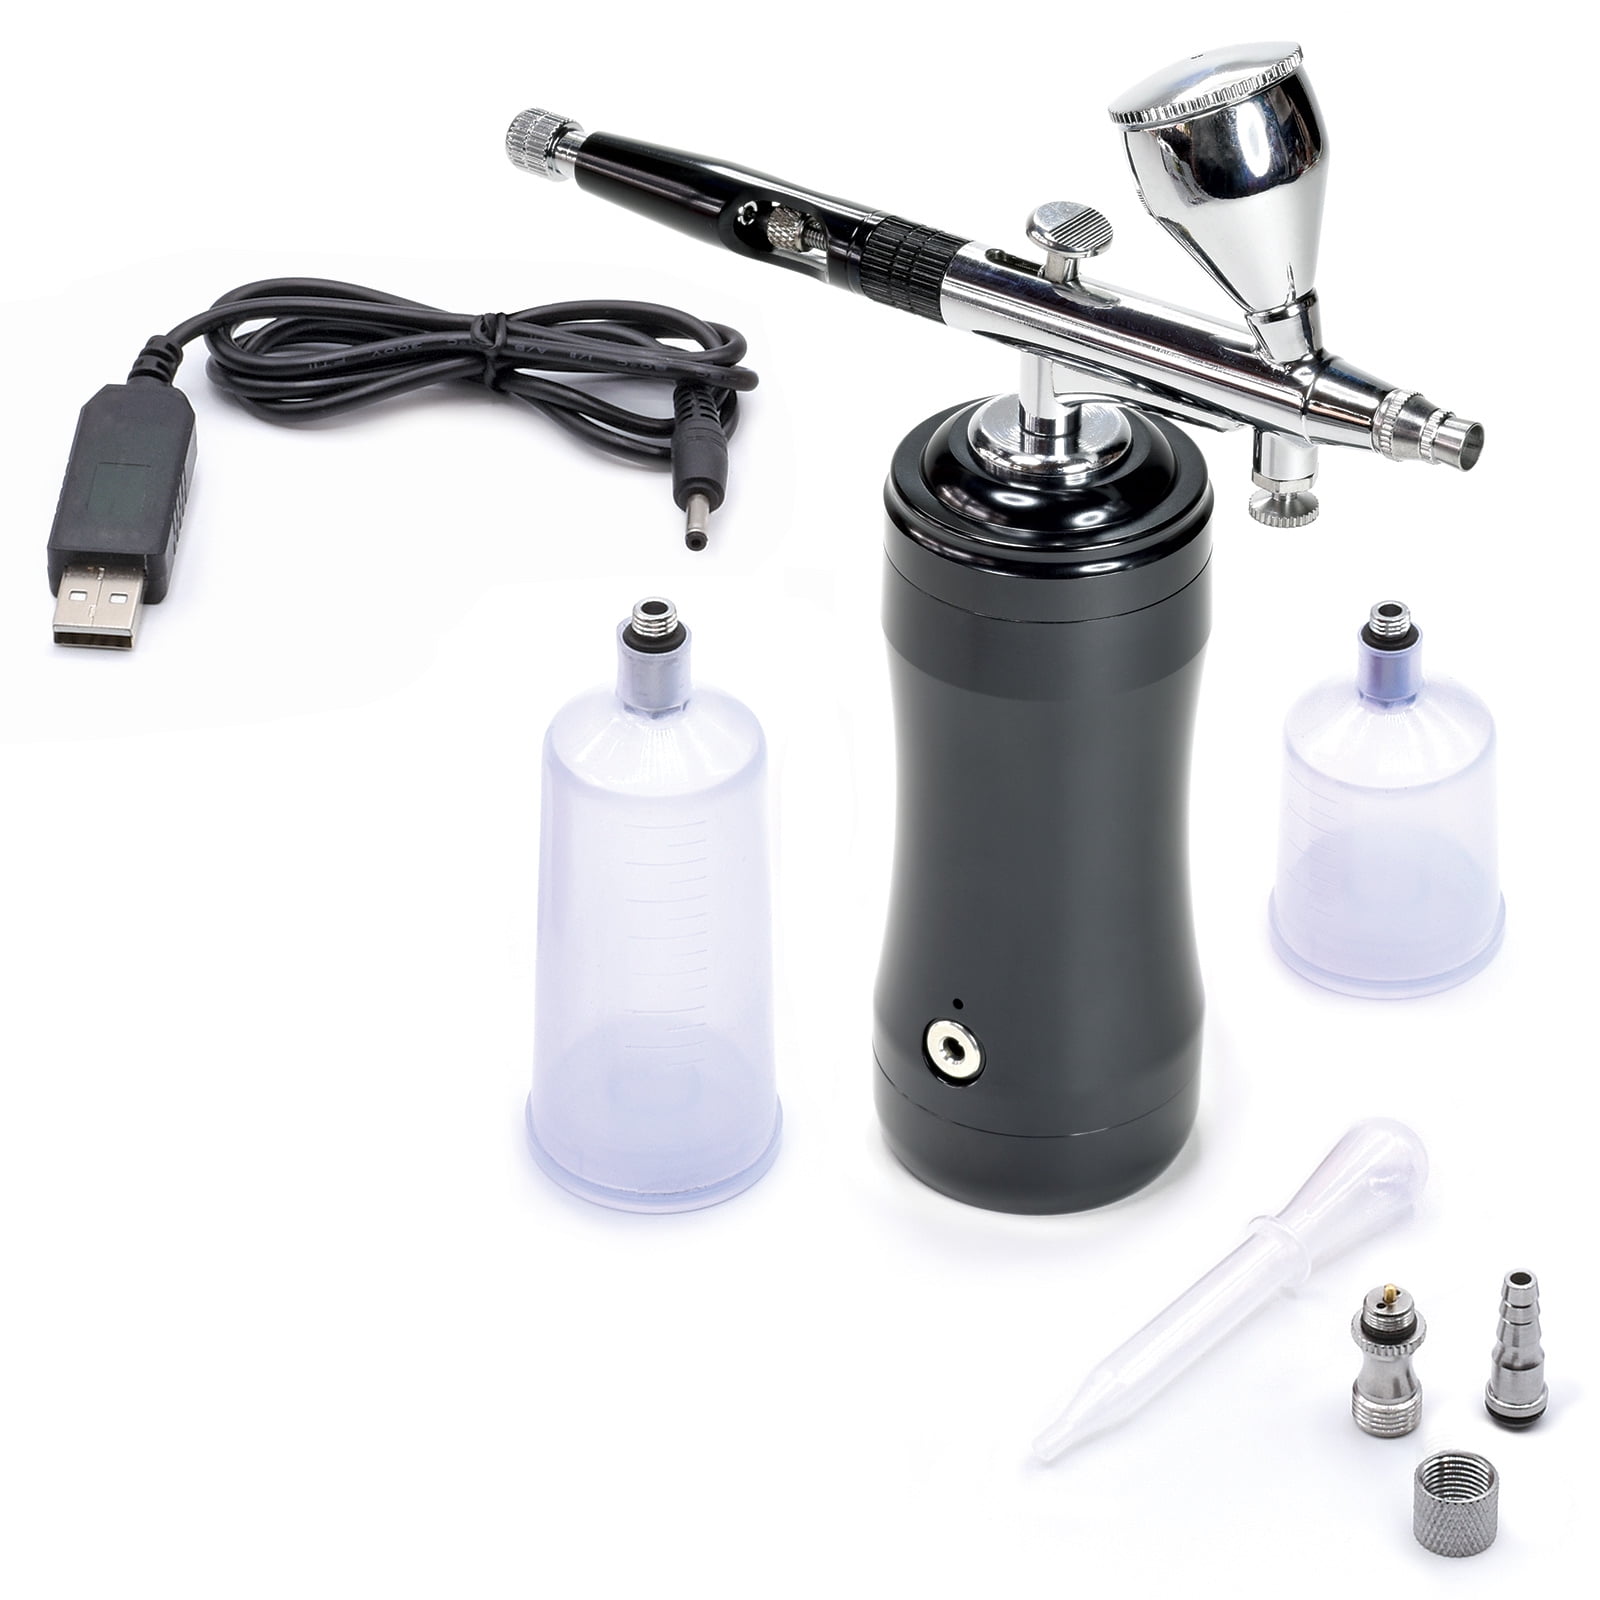 Master Performance G233 Airbrush Kit with Mini Portable Compressor